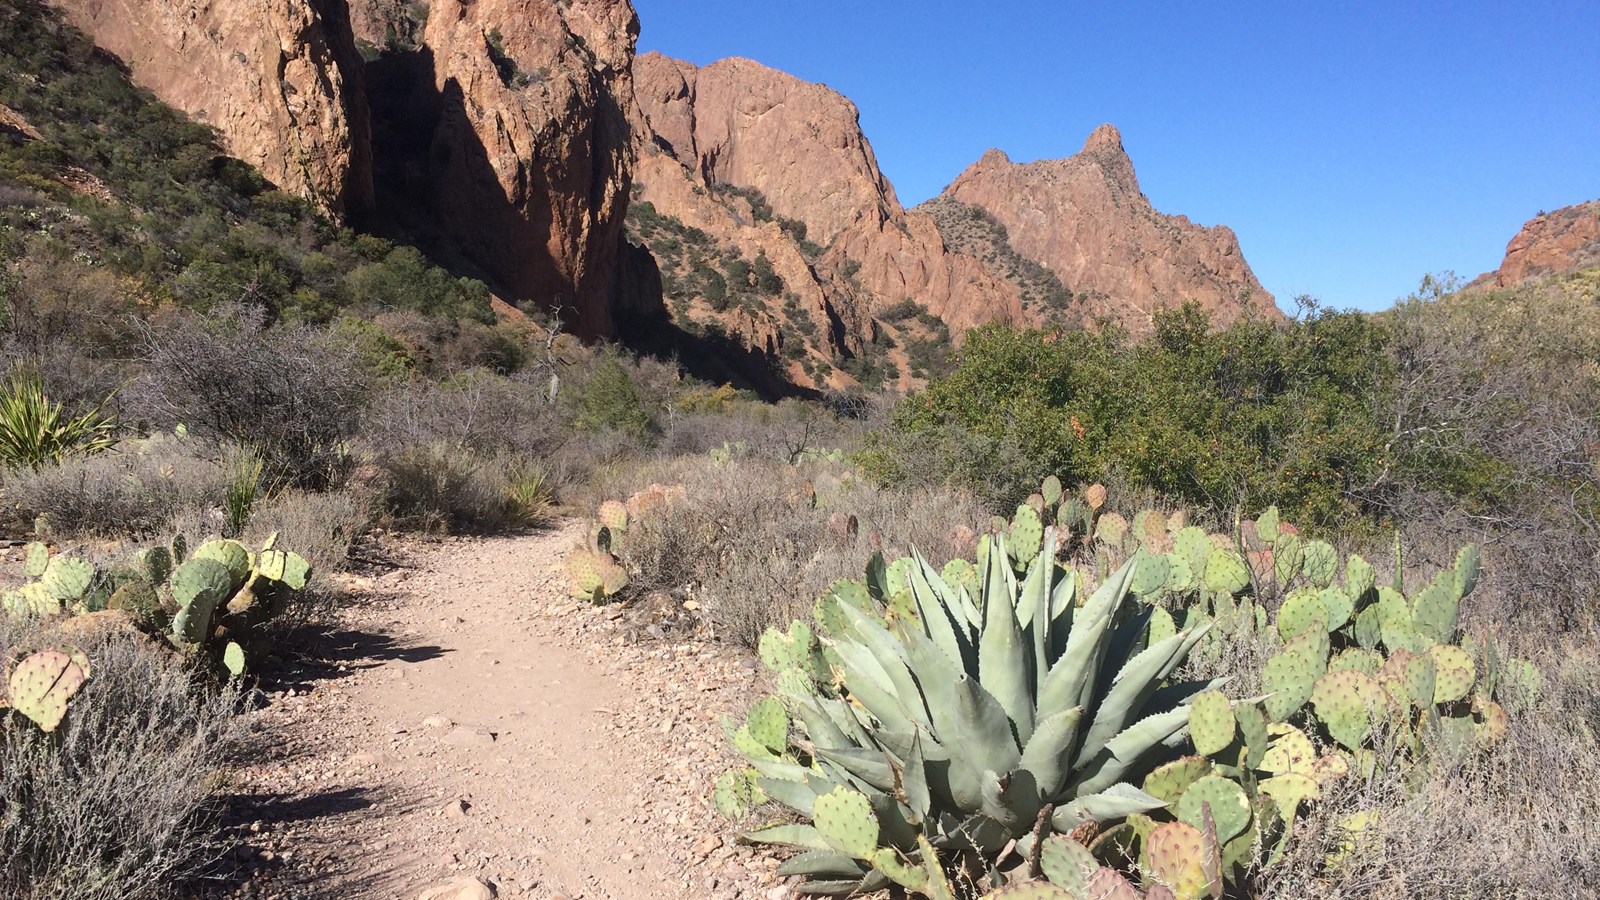 An agave plant grows next to a dirt trail that heads towards a 